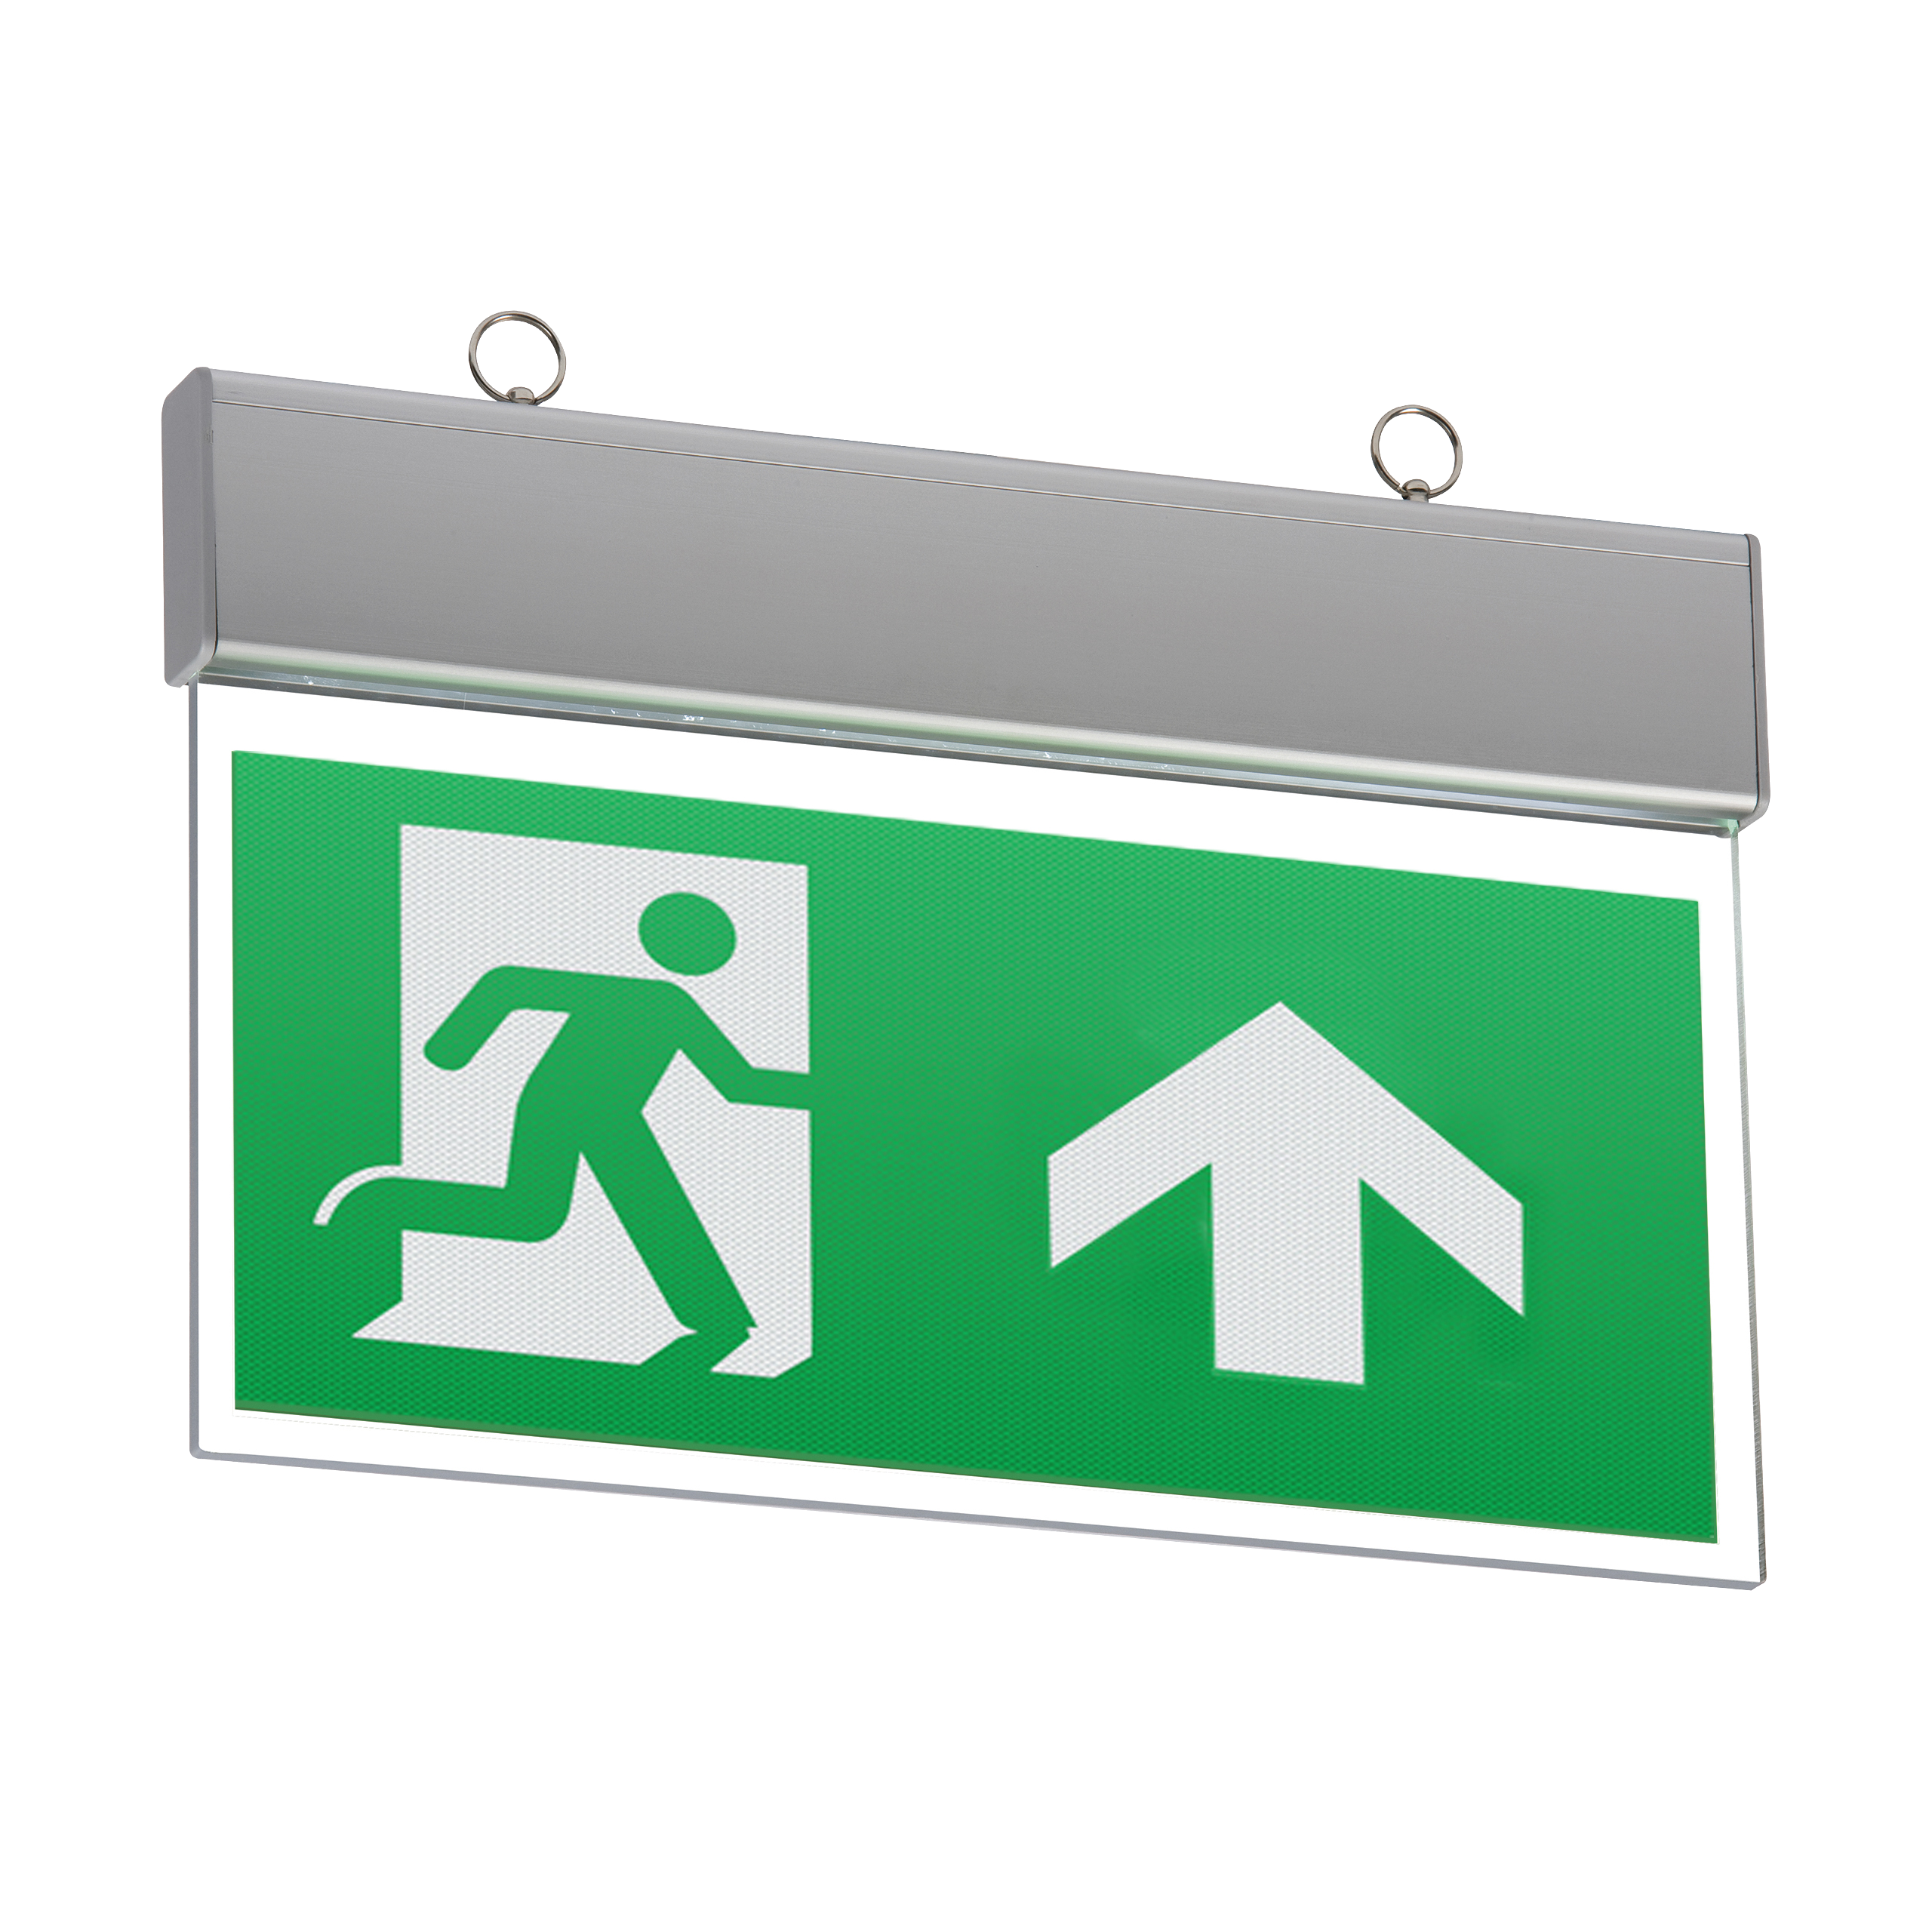 230V IP20 Ceiling Mounted LED Emergency Exit Sign (maintained/non-maintained) - EMSWING 